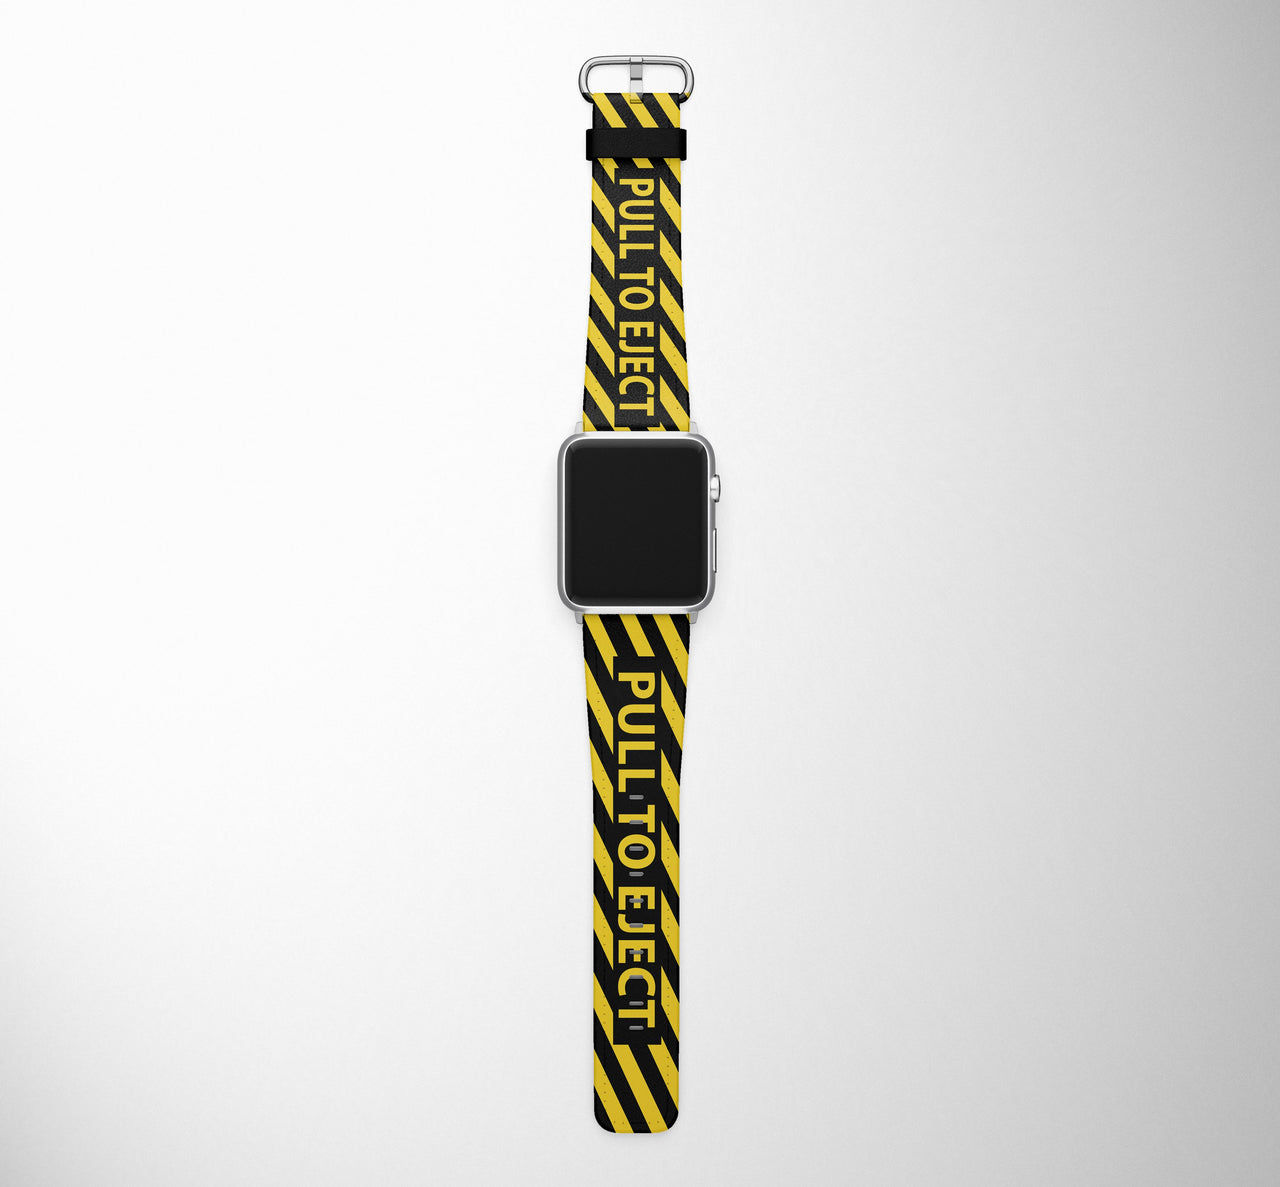 Pull to Eject Designed Leather Apple Watch Straps